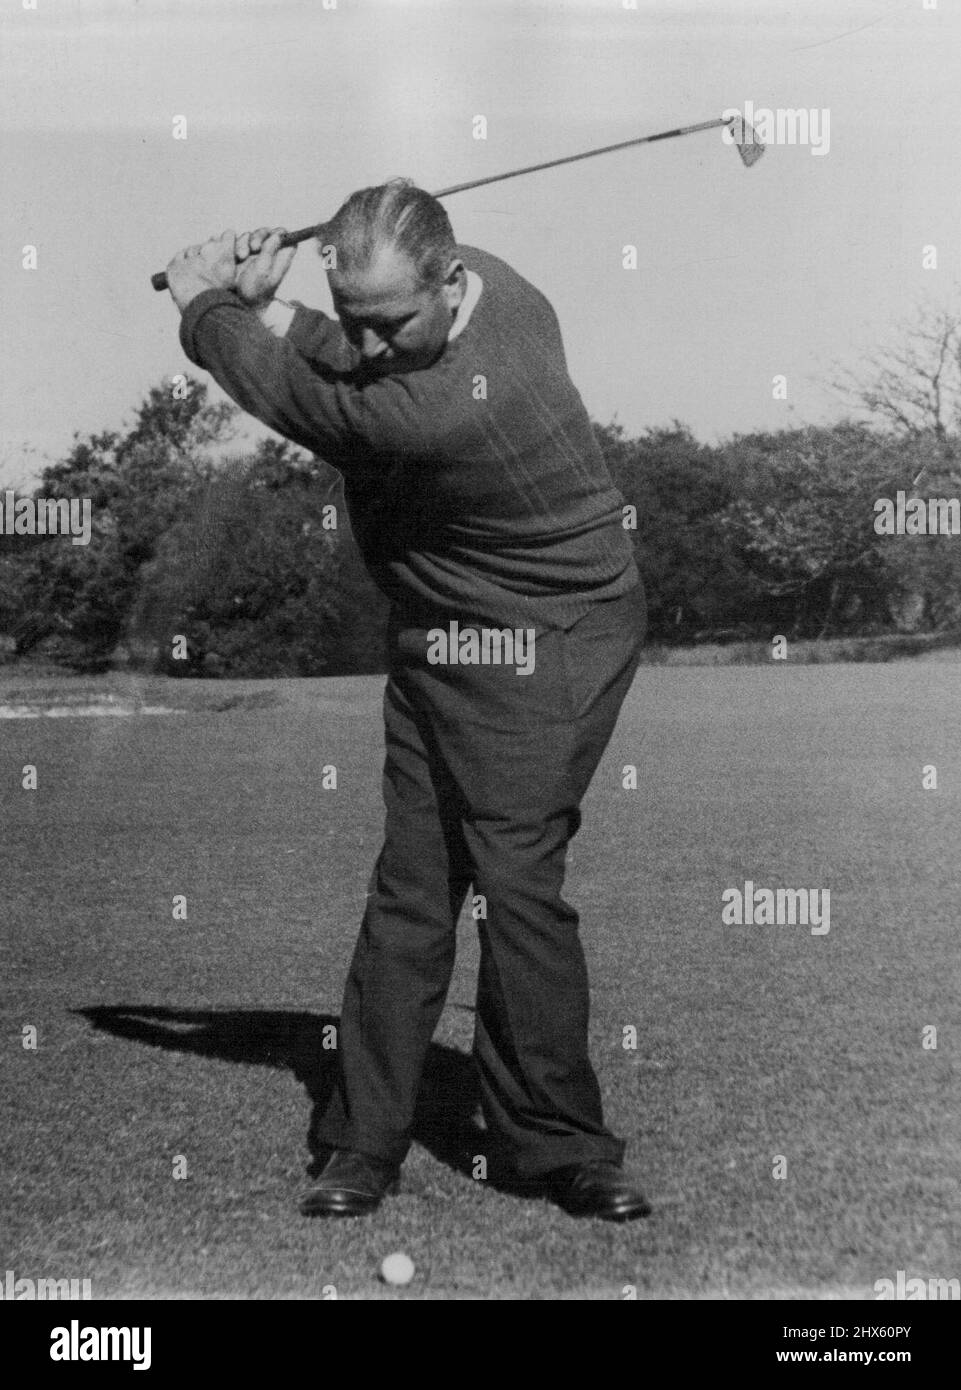 Magic eye camera shows Adams, at start of the down swing Body is fully pivoted against braced right leg. September 29, 1952;Magic eye camera shows Adams, at start of the down swing Body is fully pivoted against braced right leg. Stock Photo